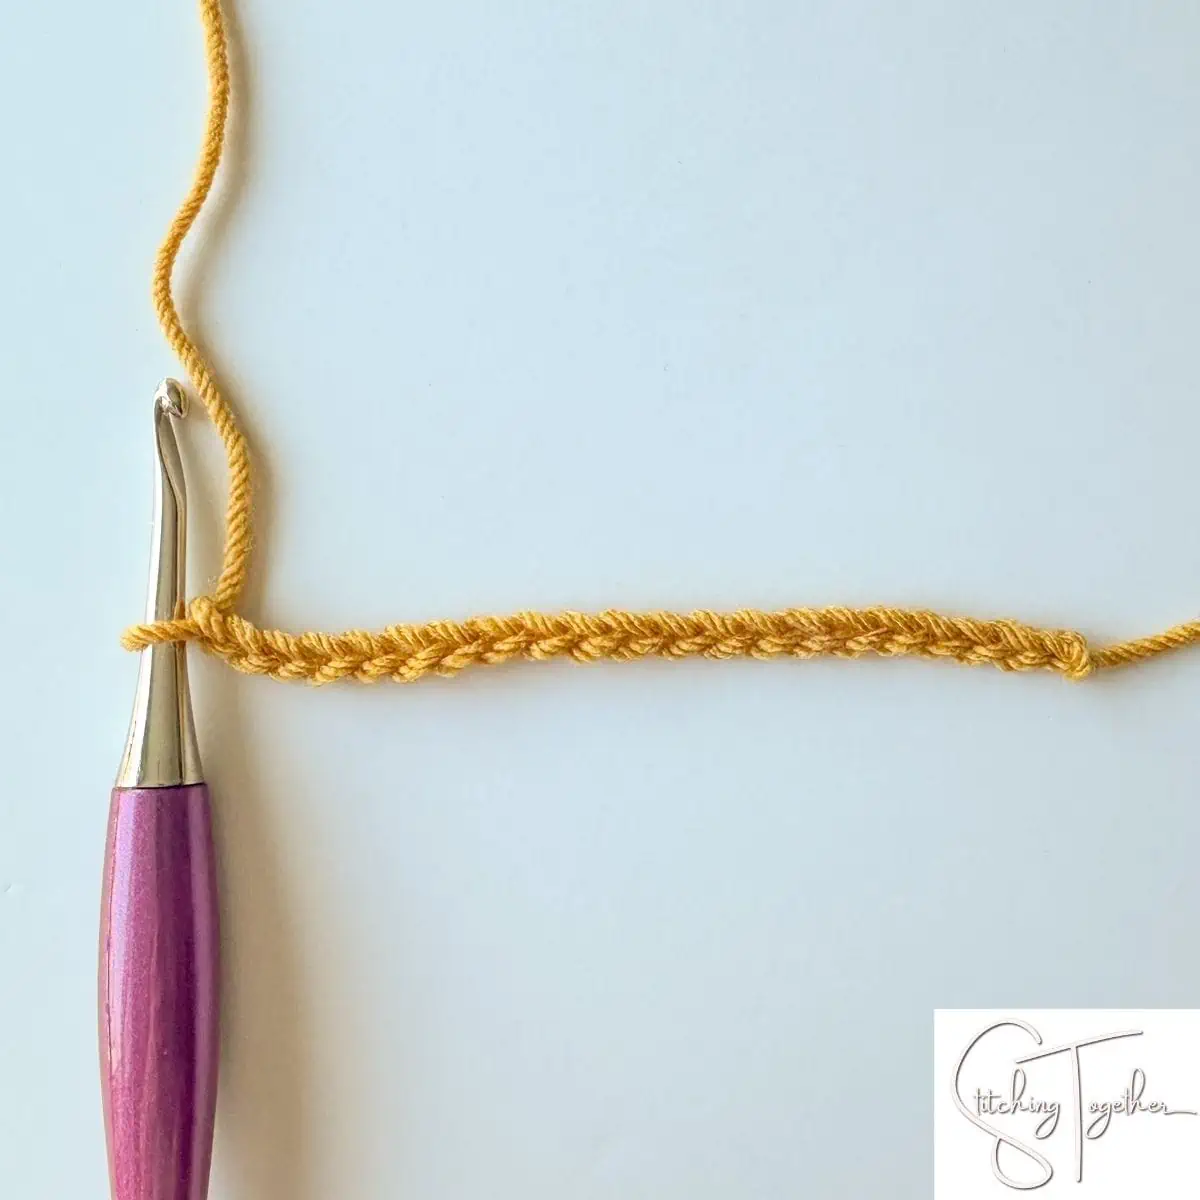 crochet chain and hook